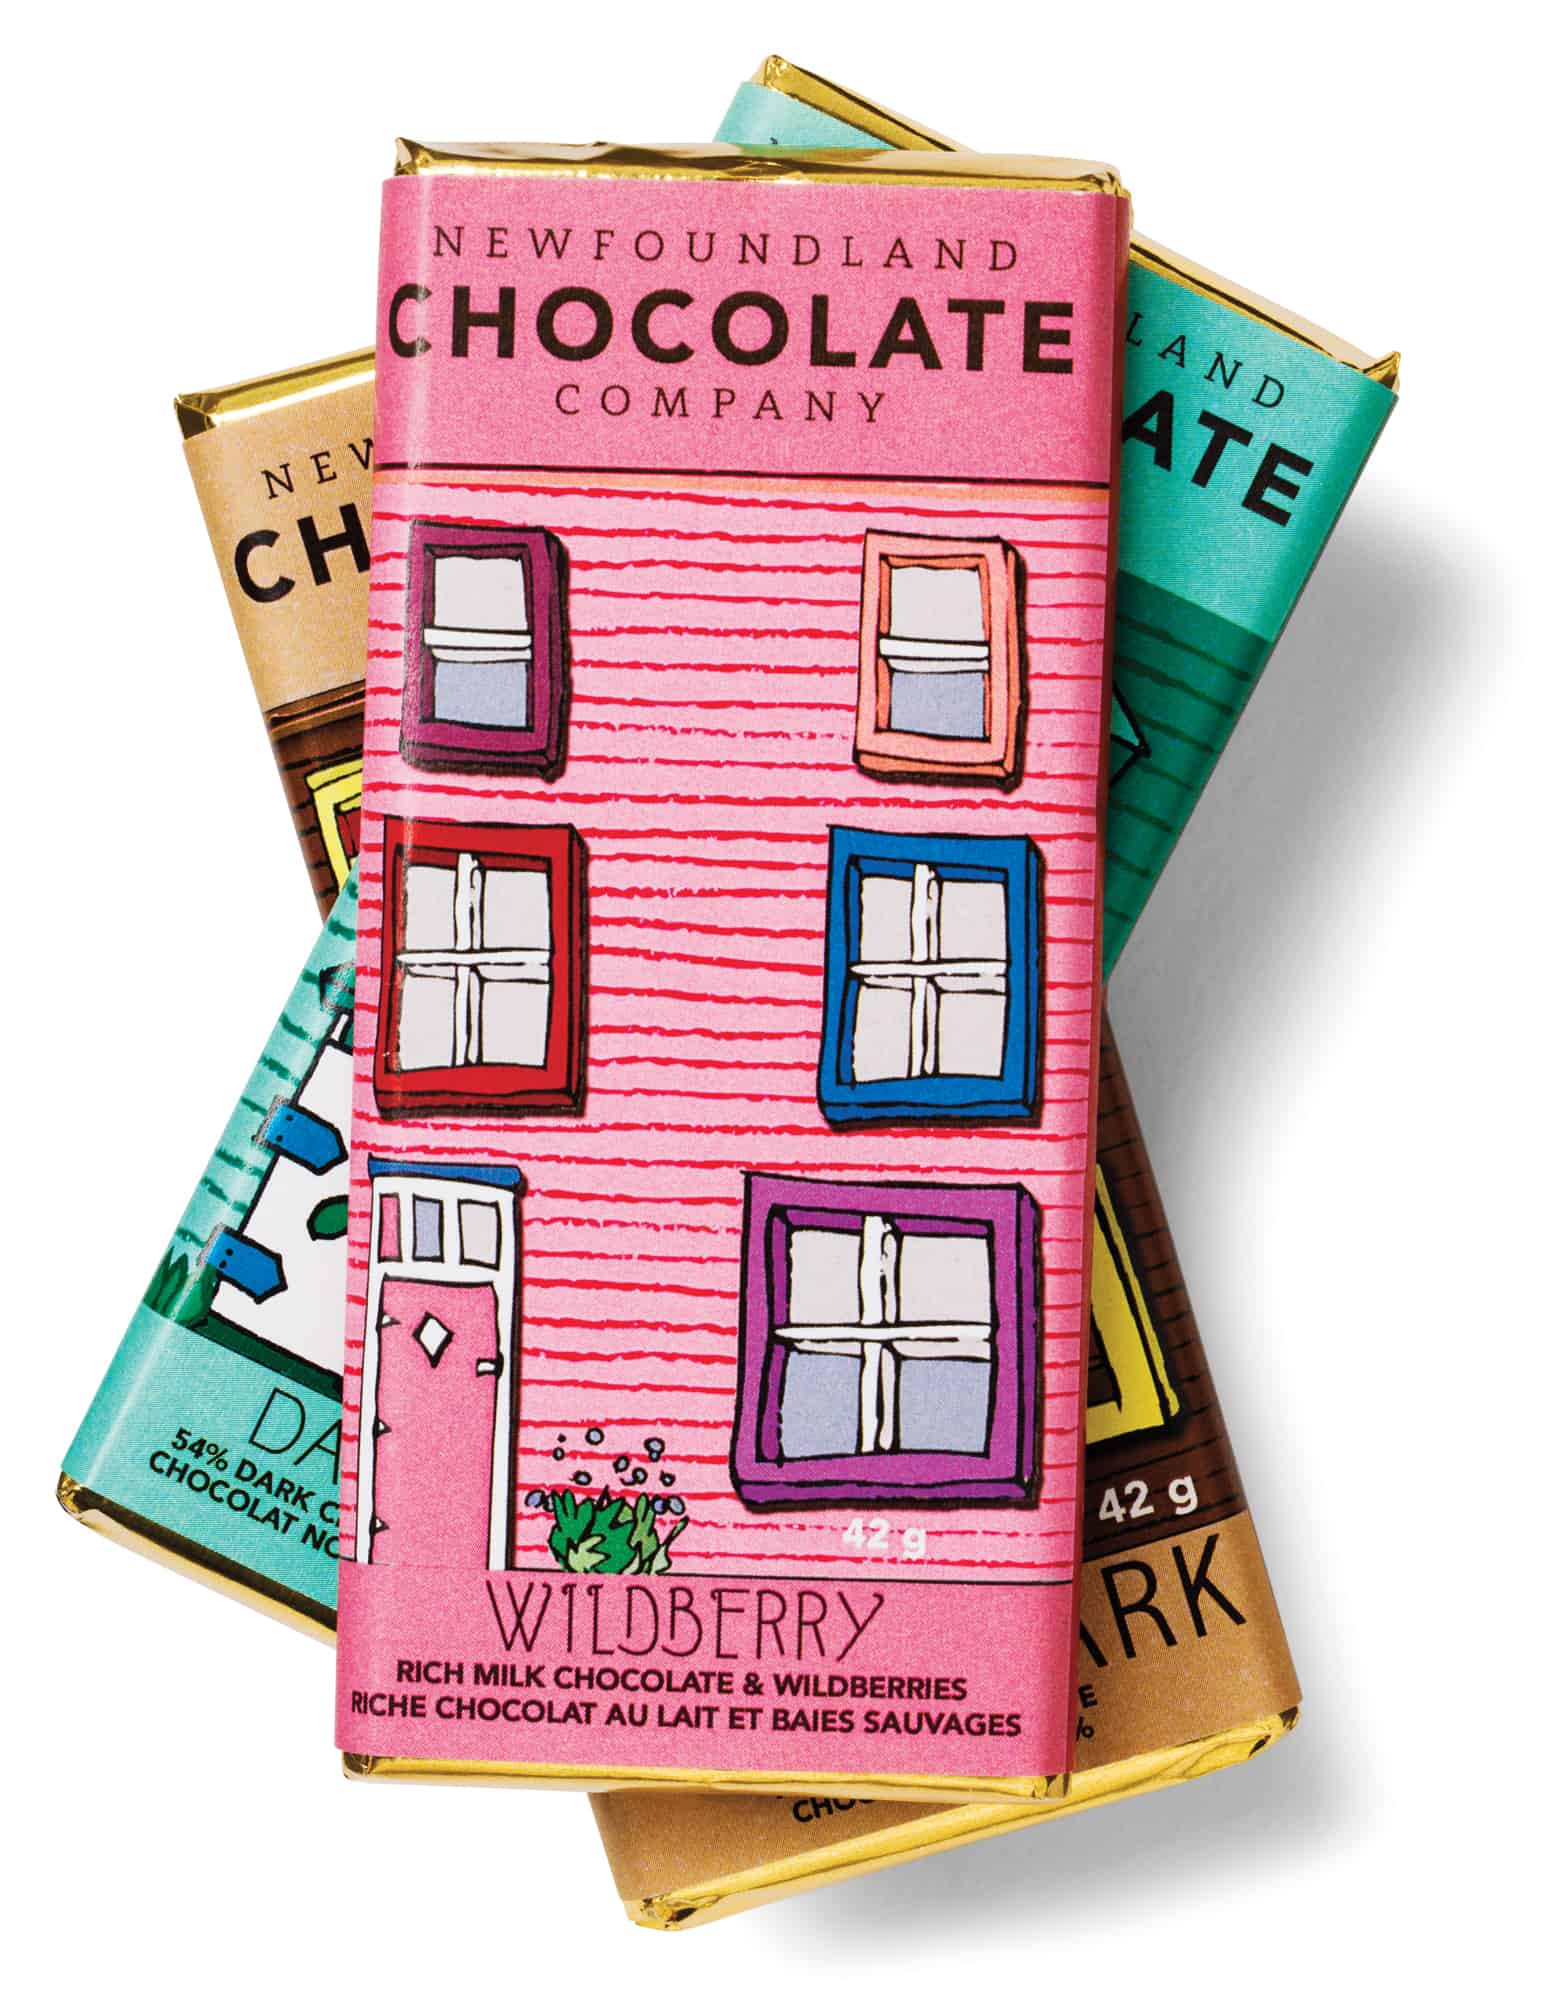 Row house chocolate bars $4.25 each by Christina Dove and Brent Smith